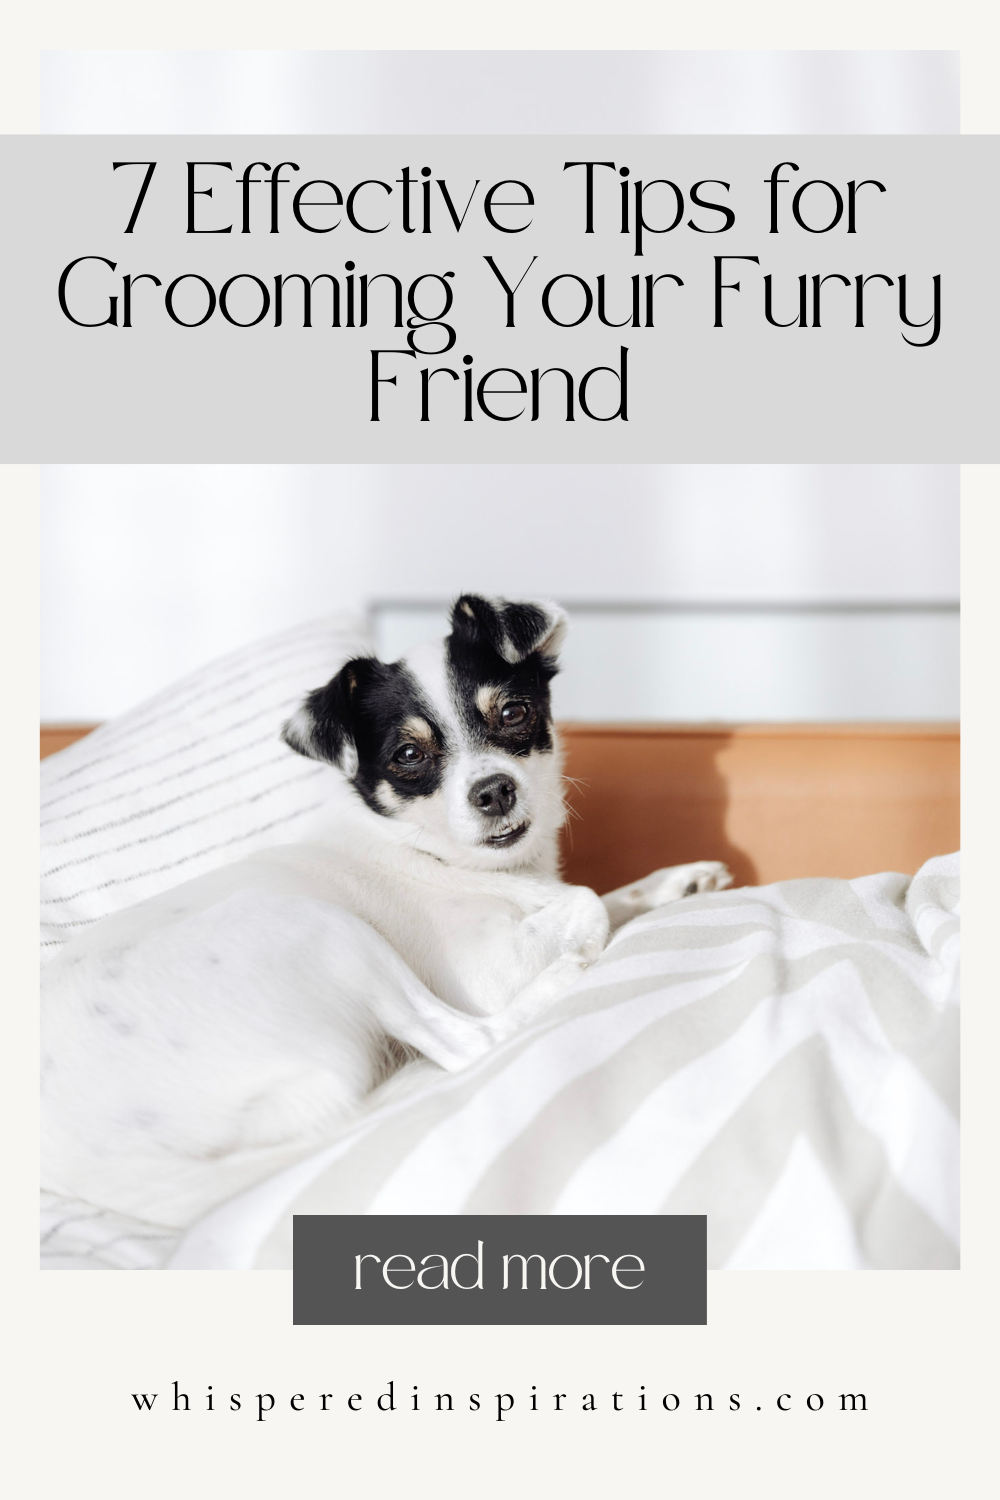 7 Effective Tips for Grooming Your Furry Friend